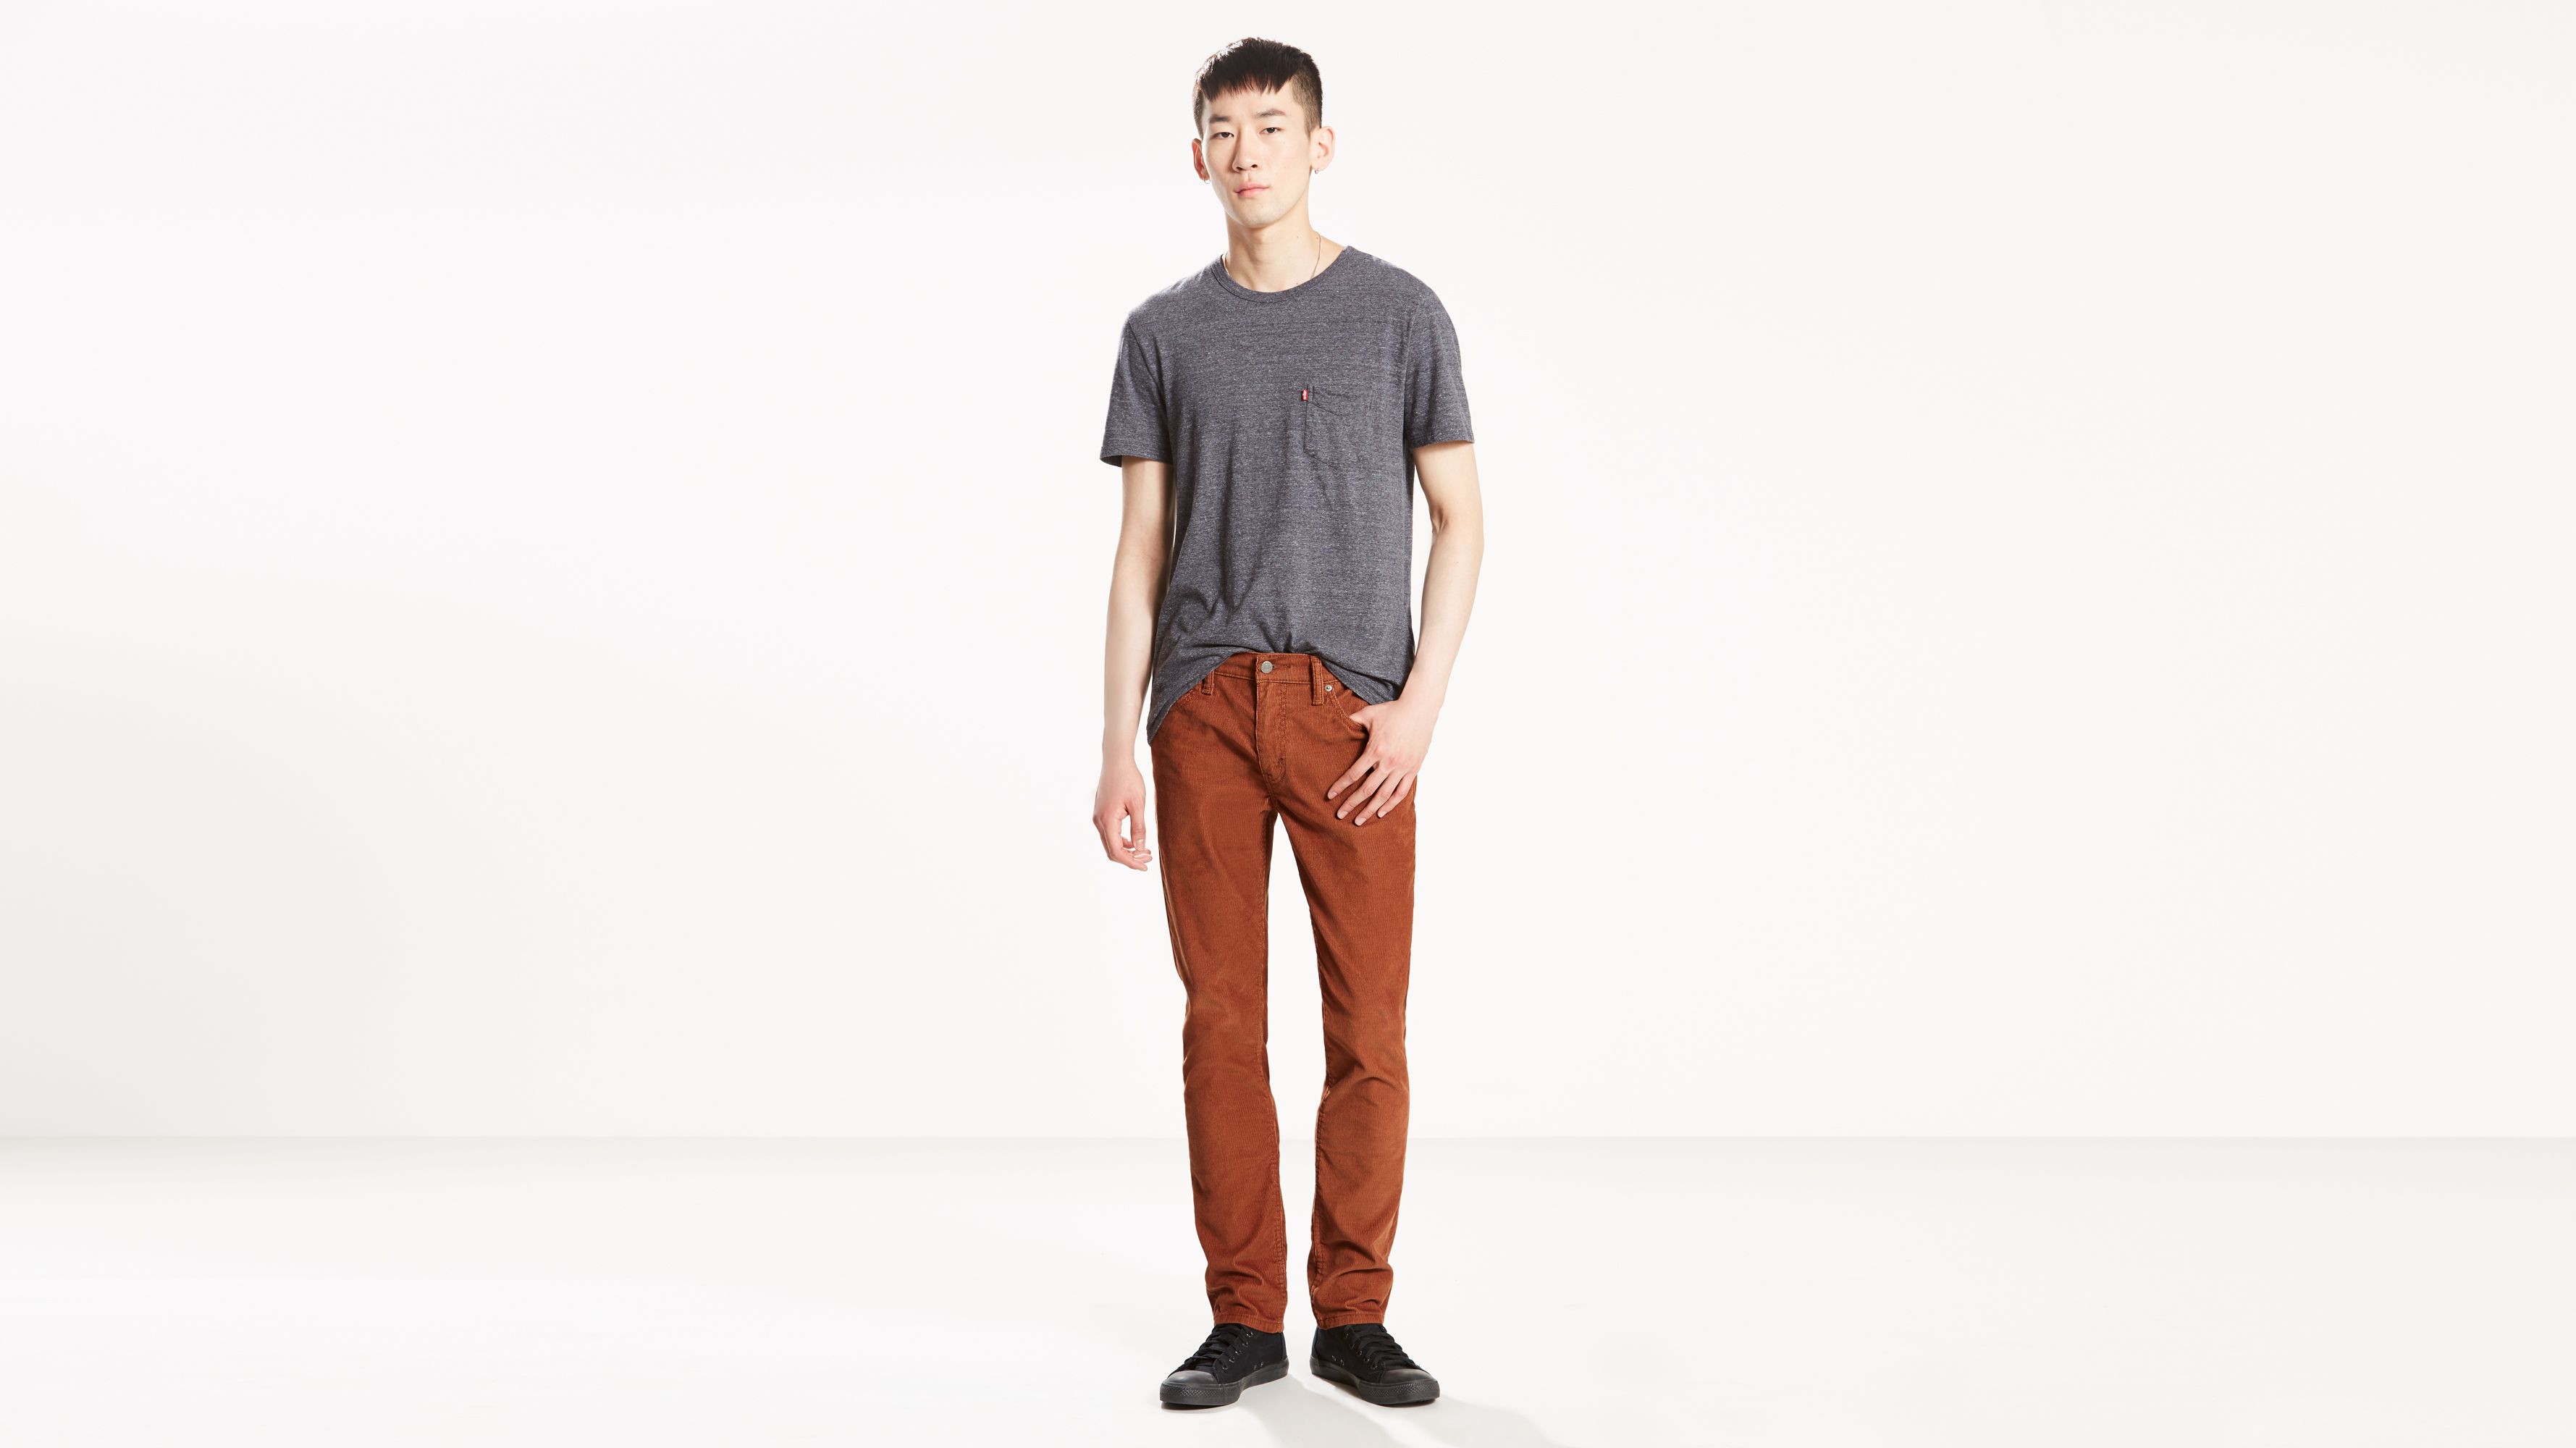 Tan Skate Trousers by Levi's on Sale